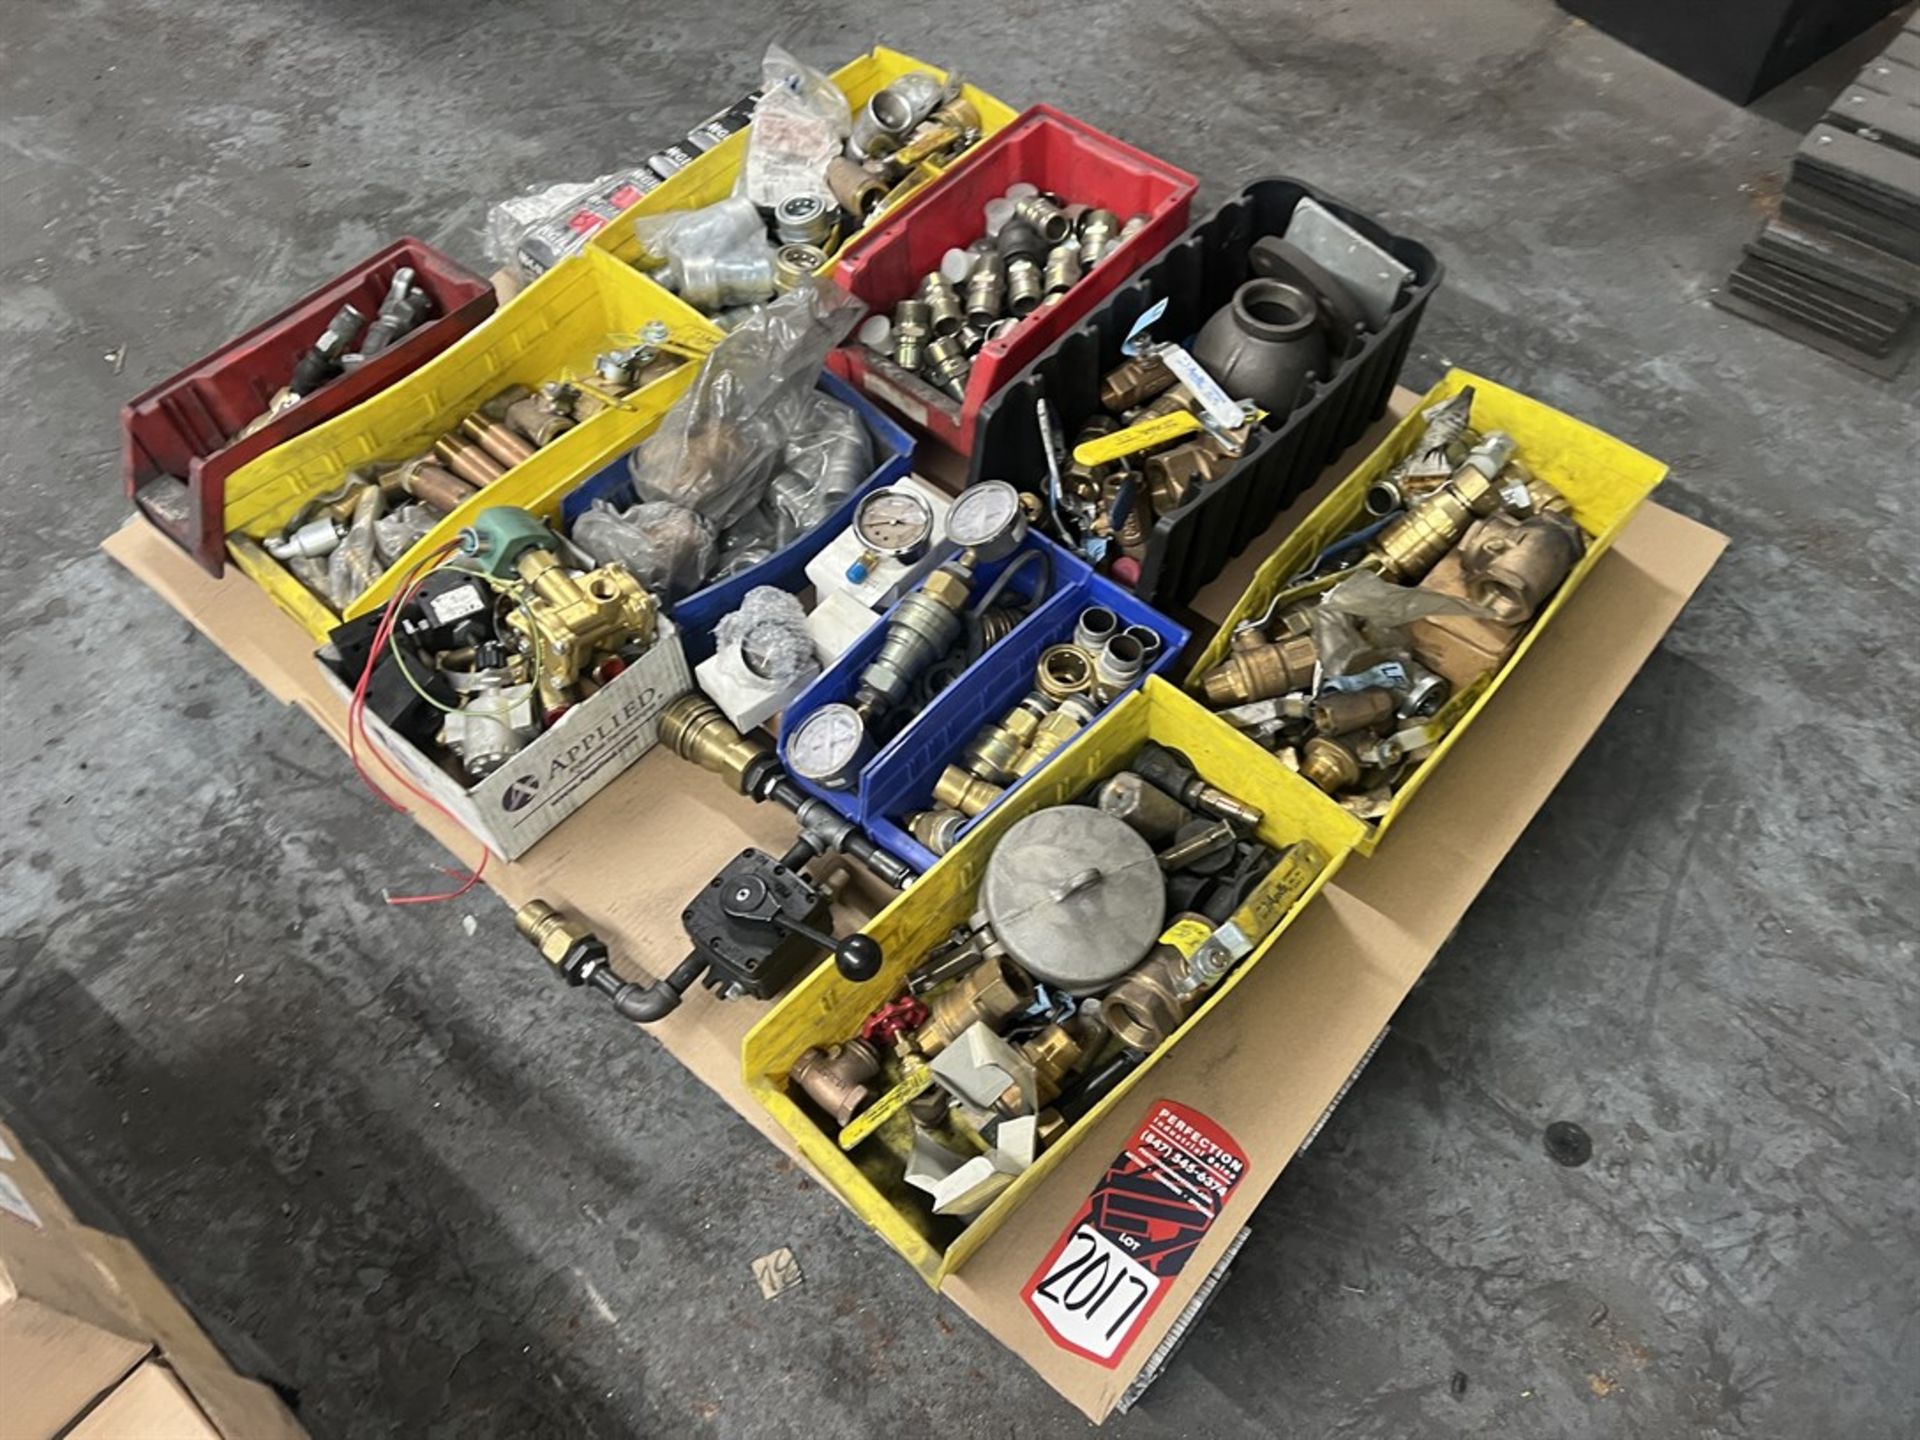 Lot of Assorted Hydraulic Couplings, Ball Valves, Bearings and Solenoids